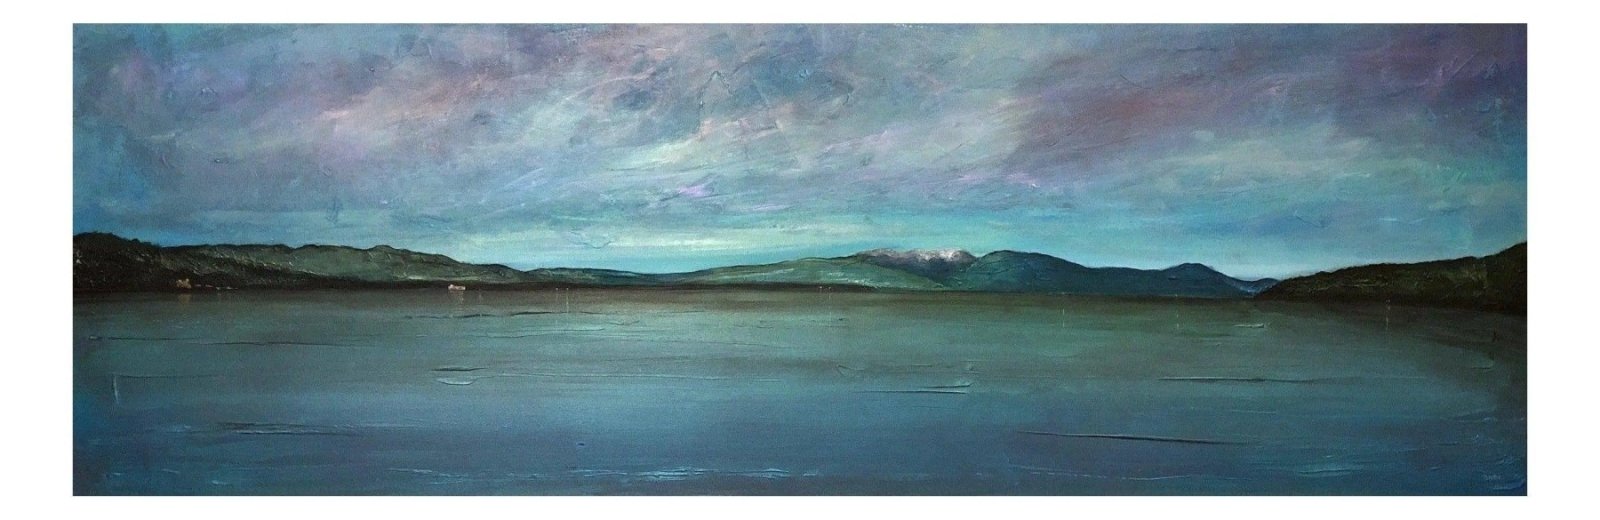 Loch Lomond From Balloch Castle Country Park-Panoramic Prints-Scottish Lochs & Mountains Art Gallery-Paintings, Prints, Homeware, Art Gifts From Scotland By Scottish Artist Kevin Hunter